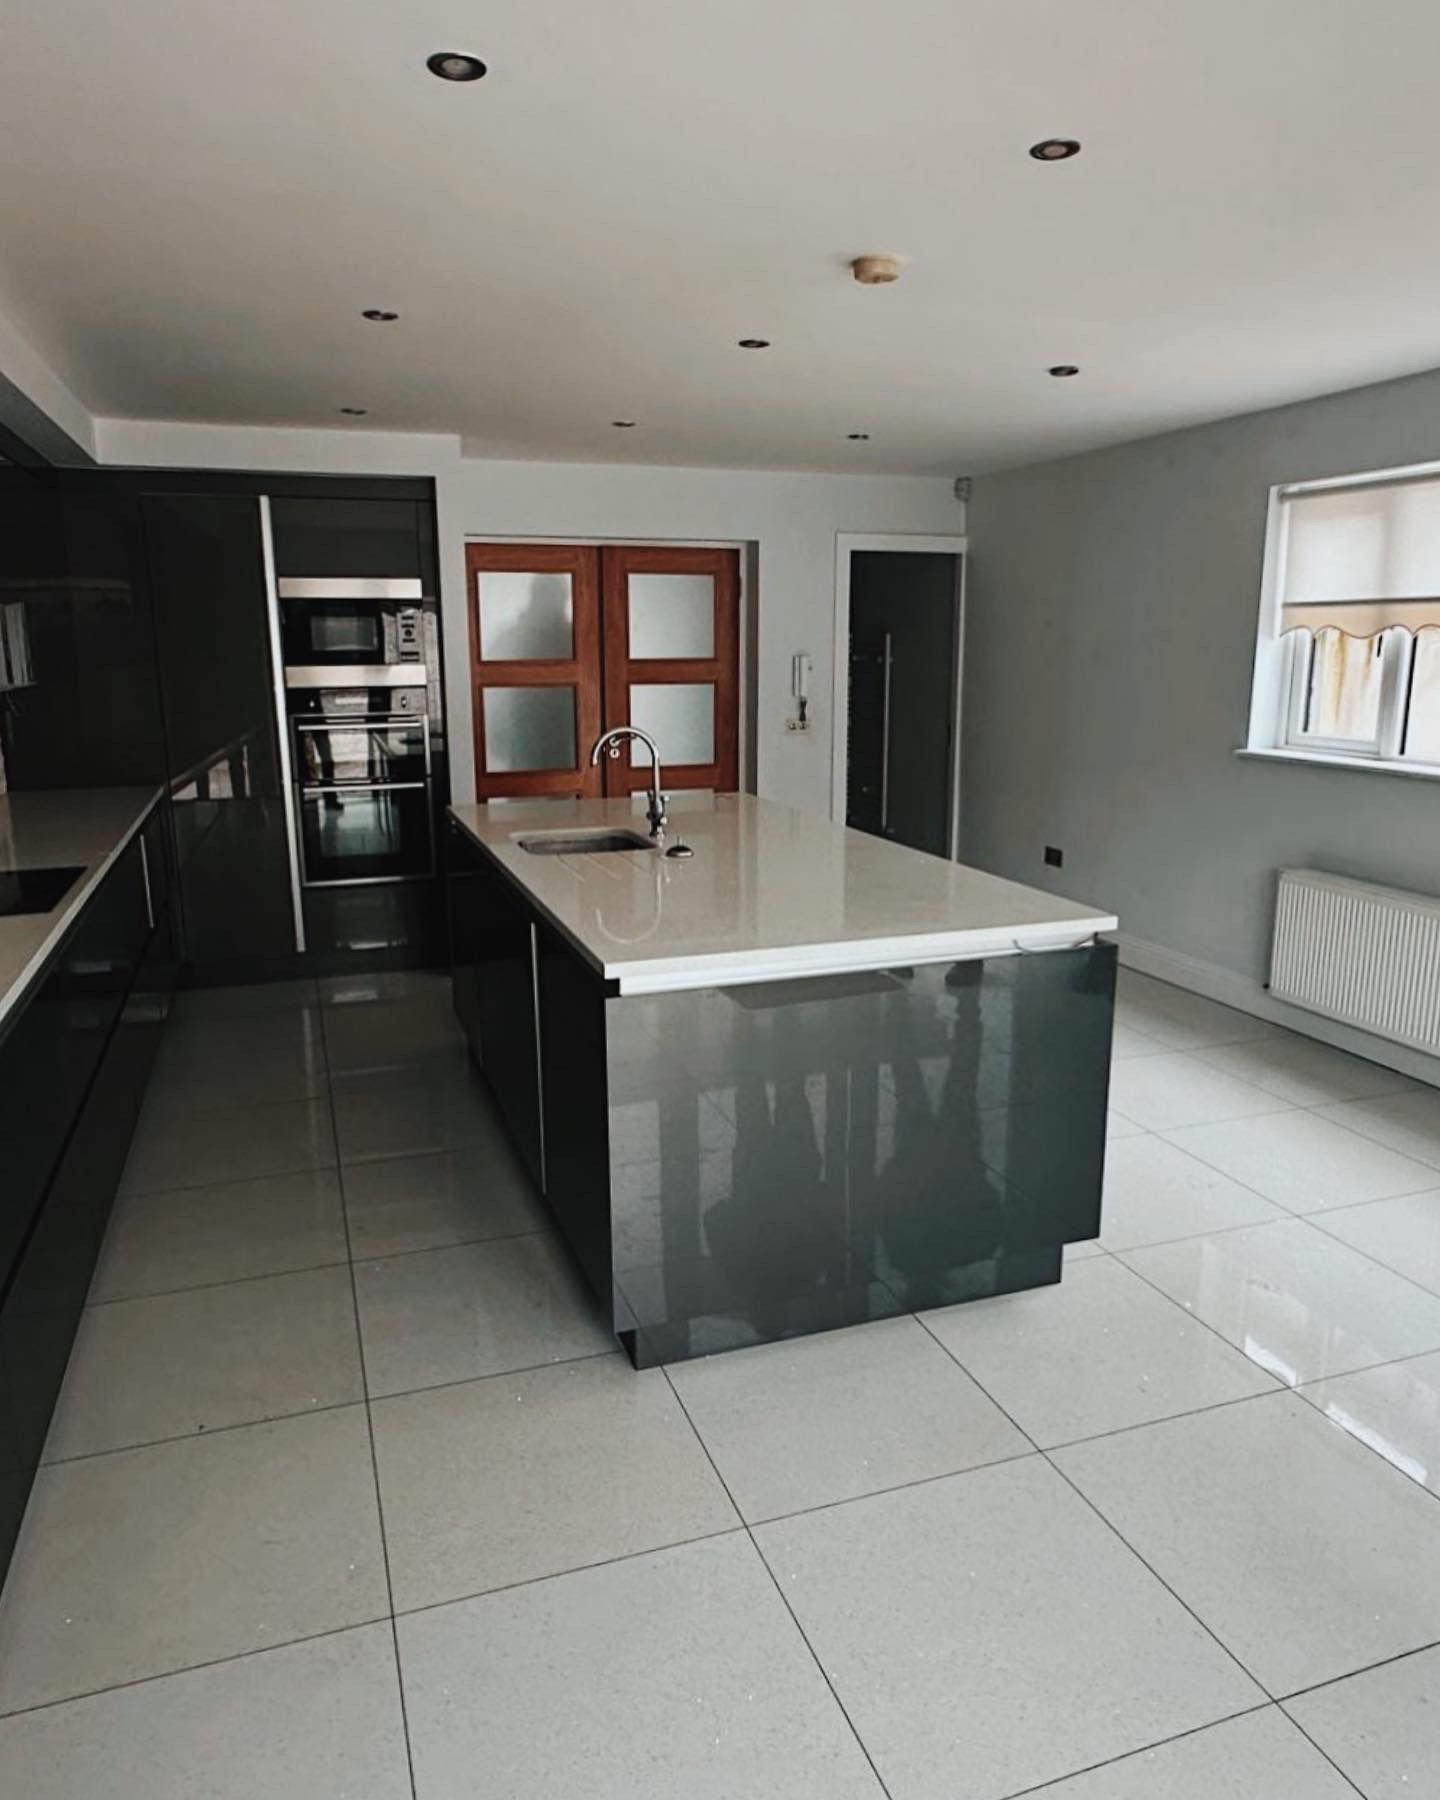 The kitchen inside the home on Killala Road in Cabra.